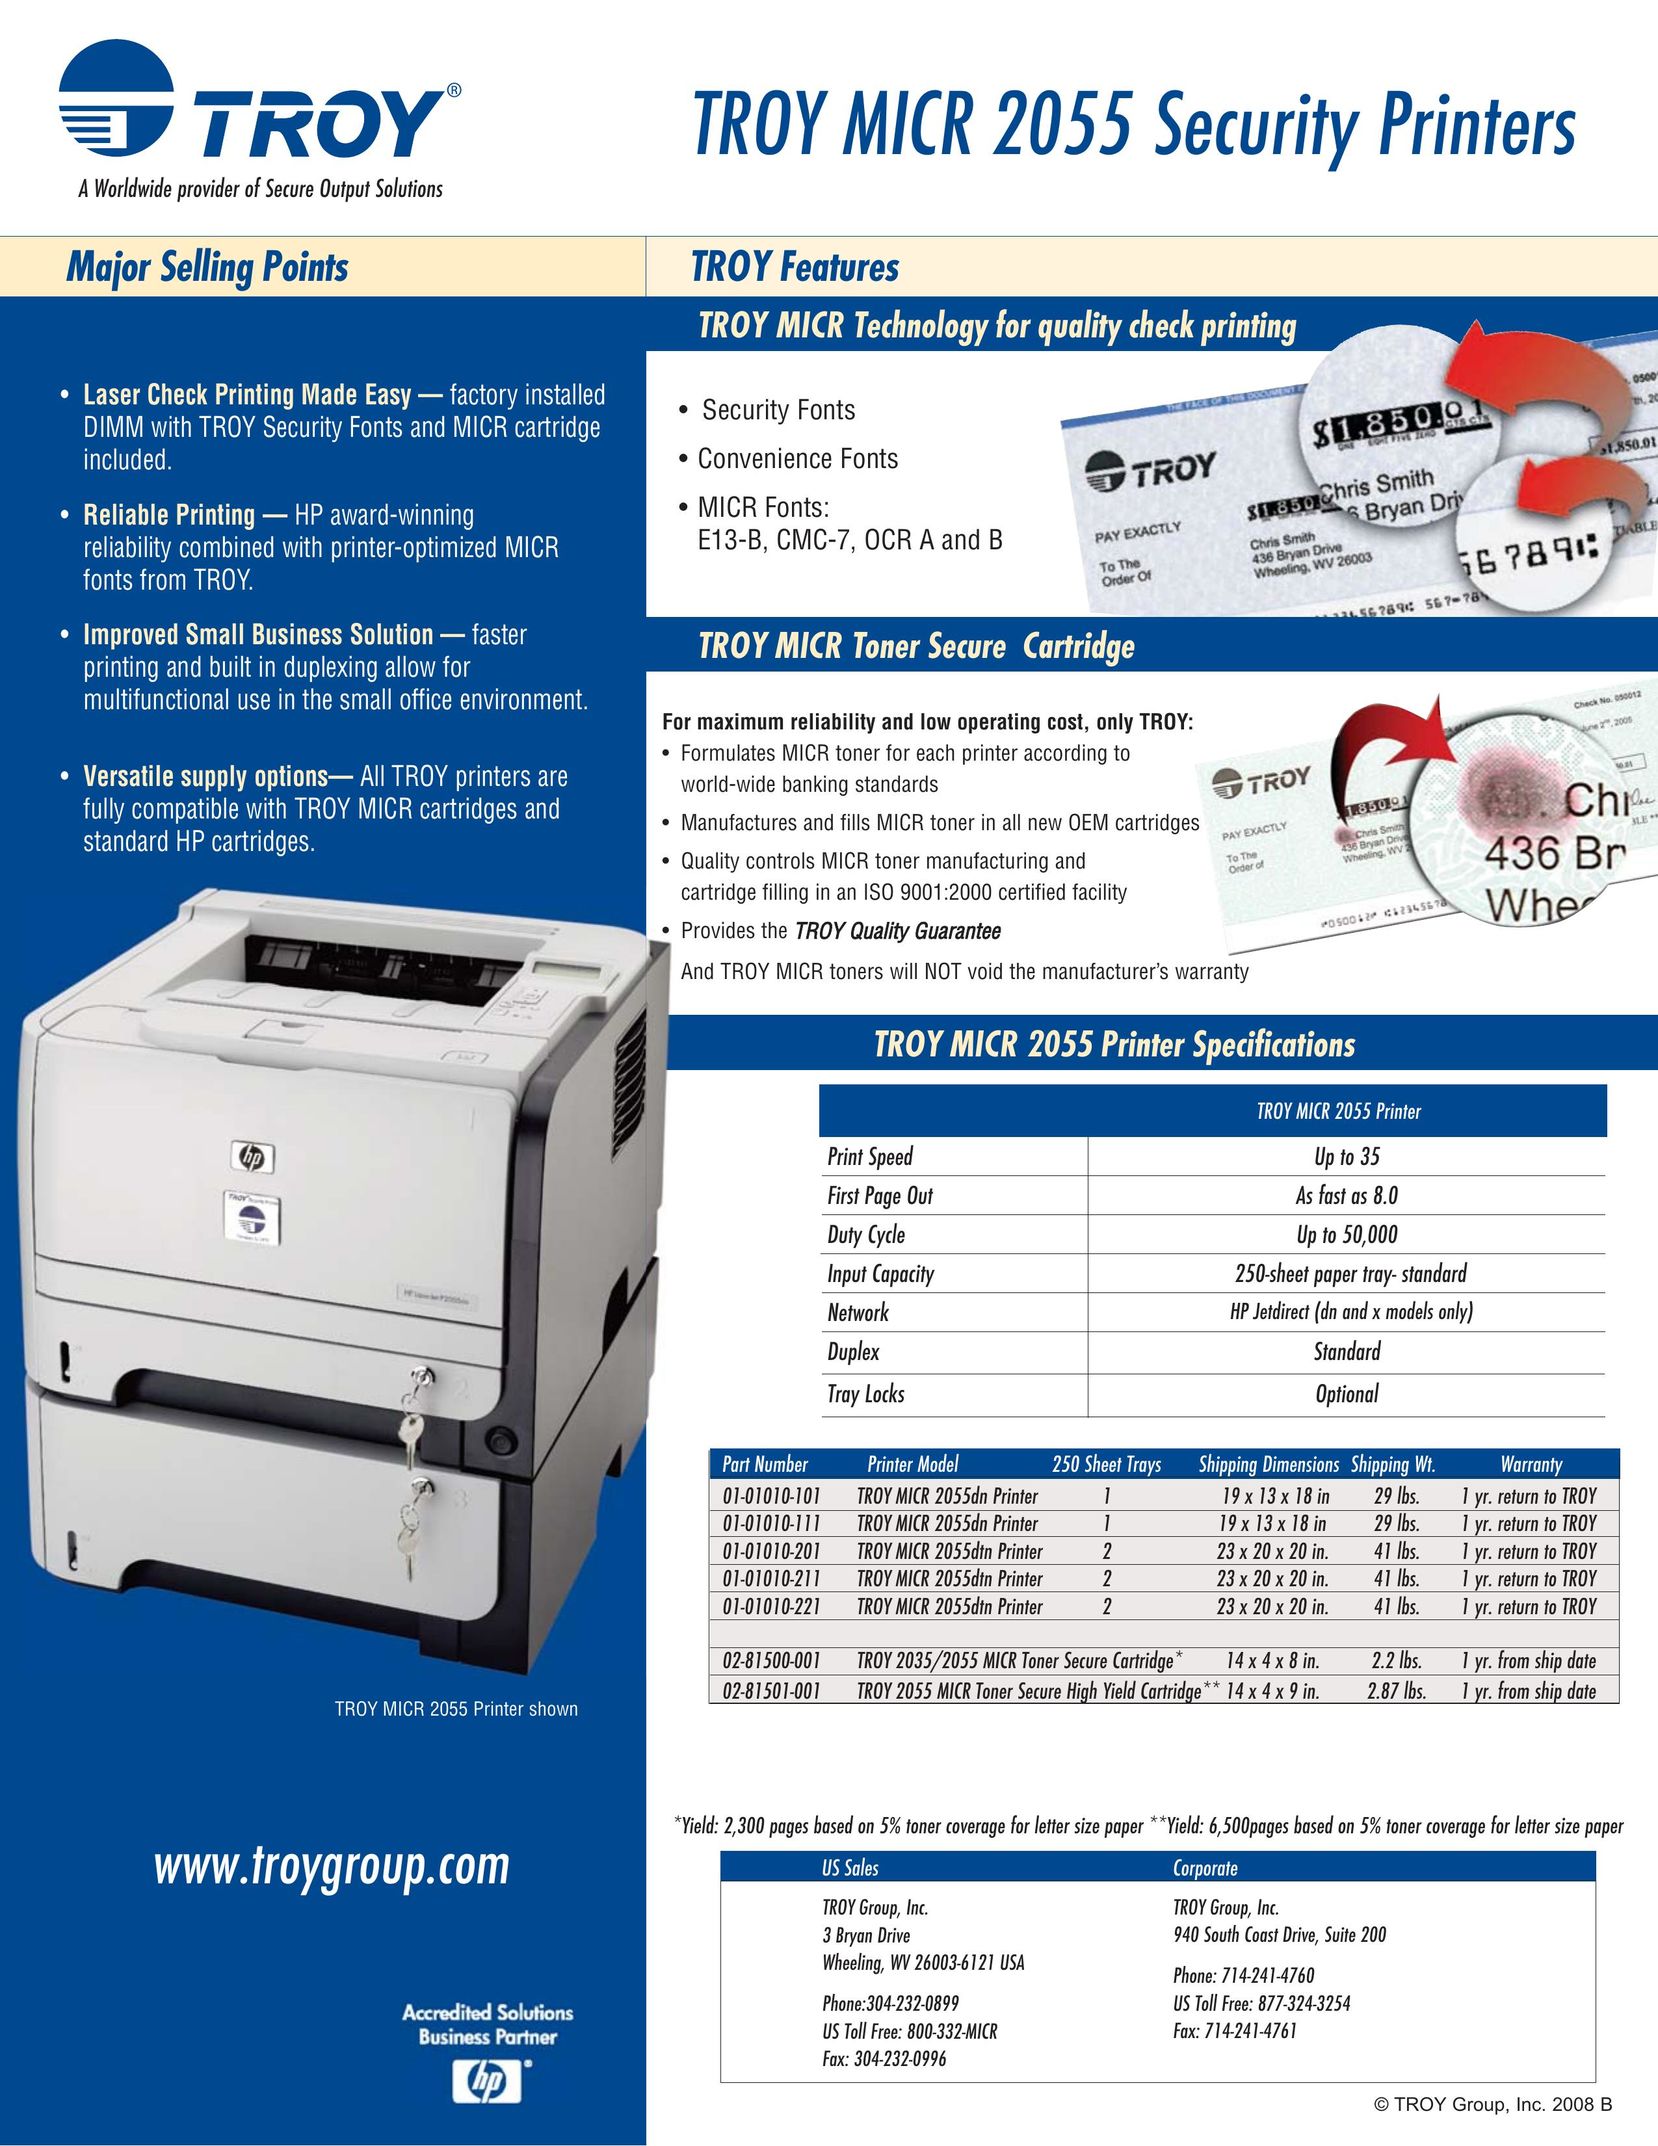 TROY Group 2055dn All in One Printer User Manual